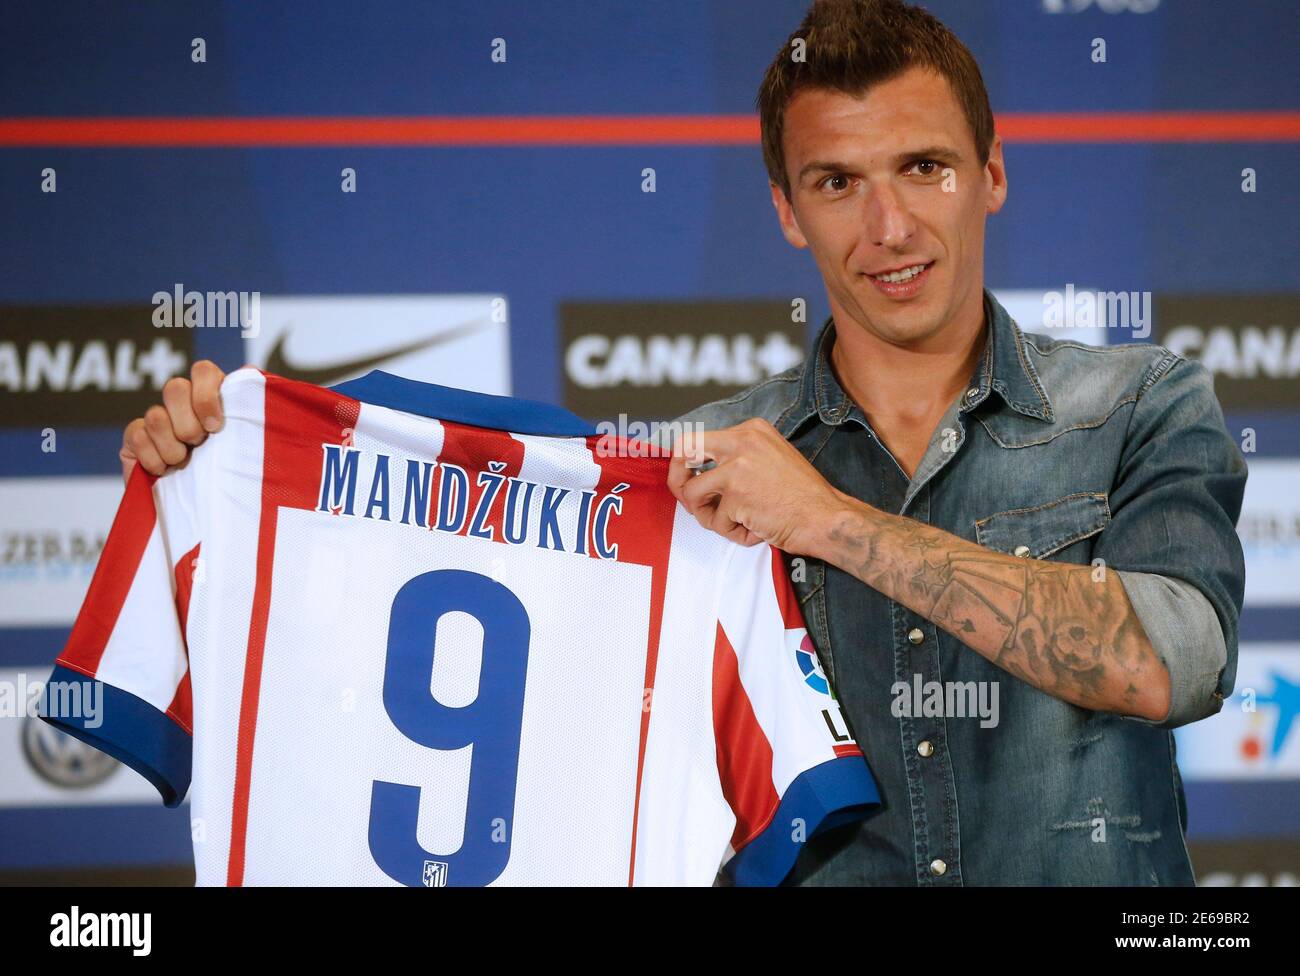 Atletico Madrid's newly signed player, Croatian Mario Mandzukic, poses with  his jersey during a media presentation